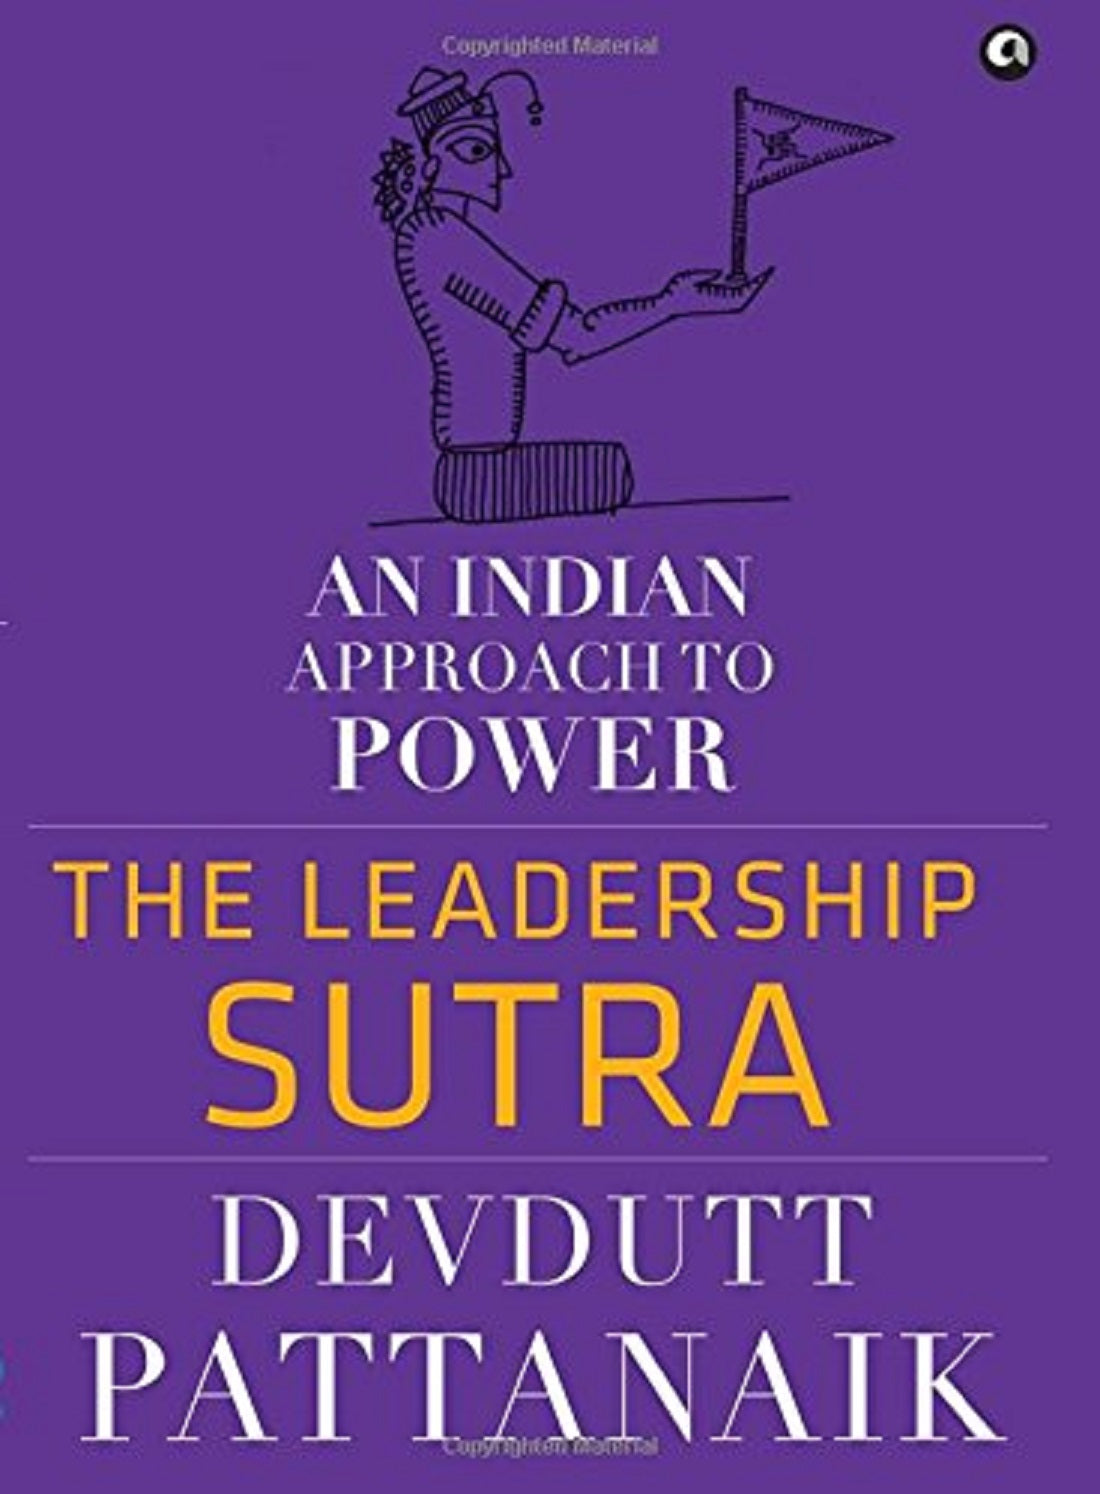 THE LEADERSHIP SUTRA